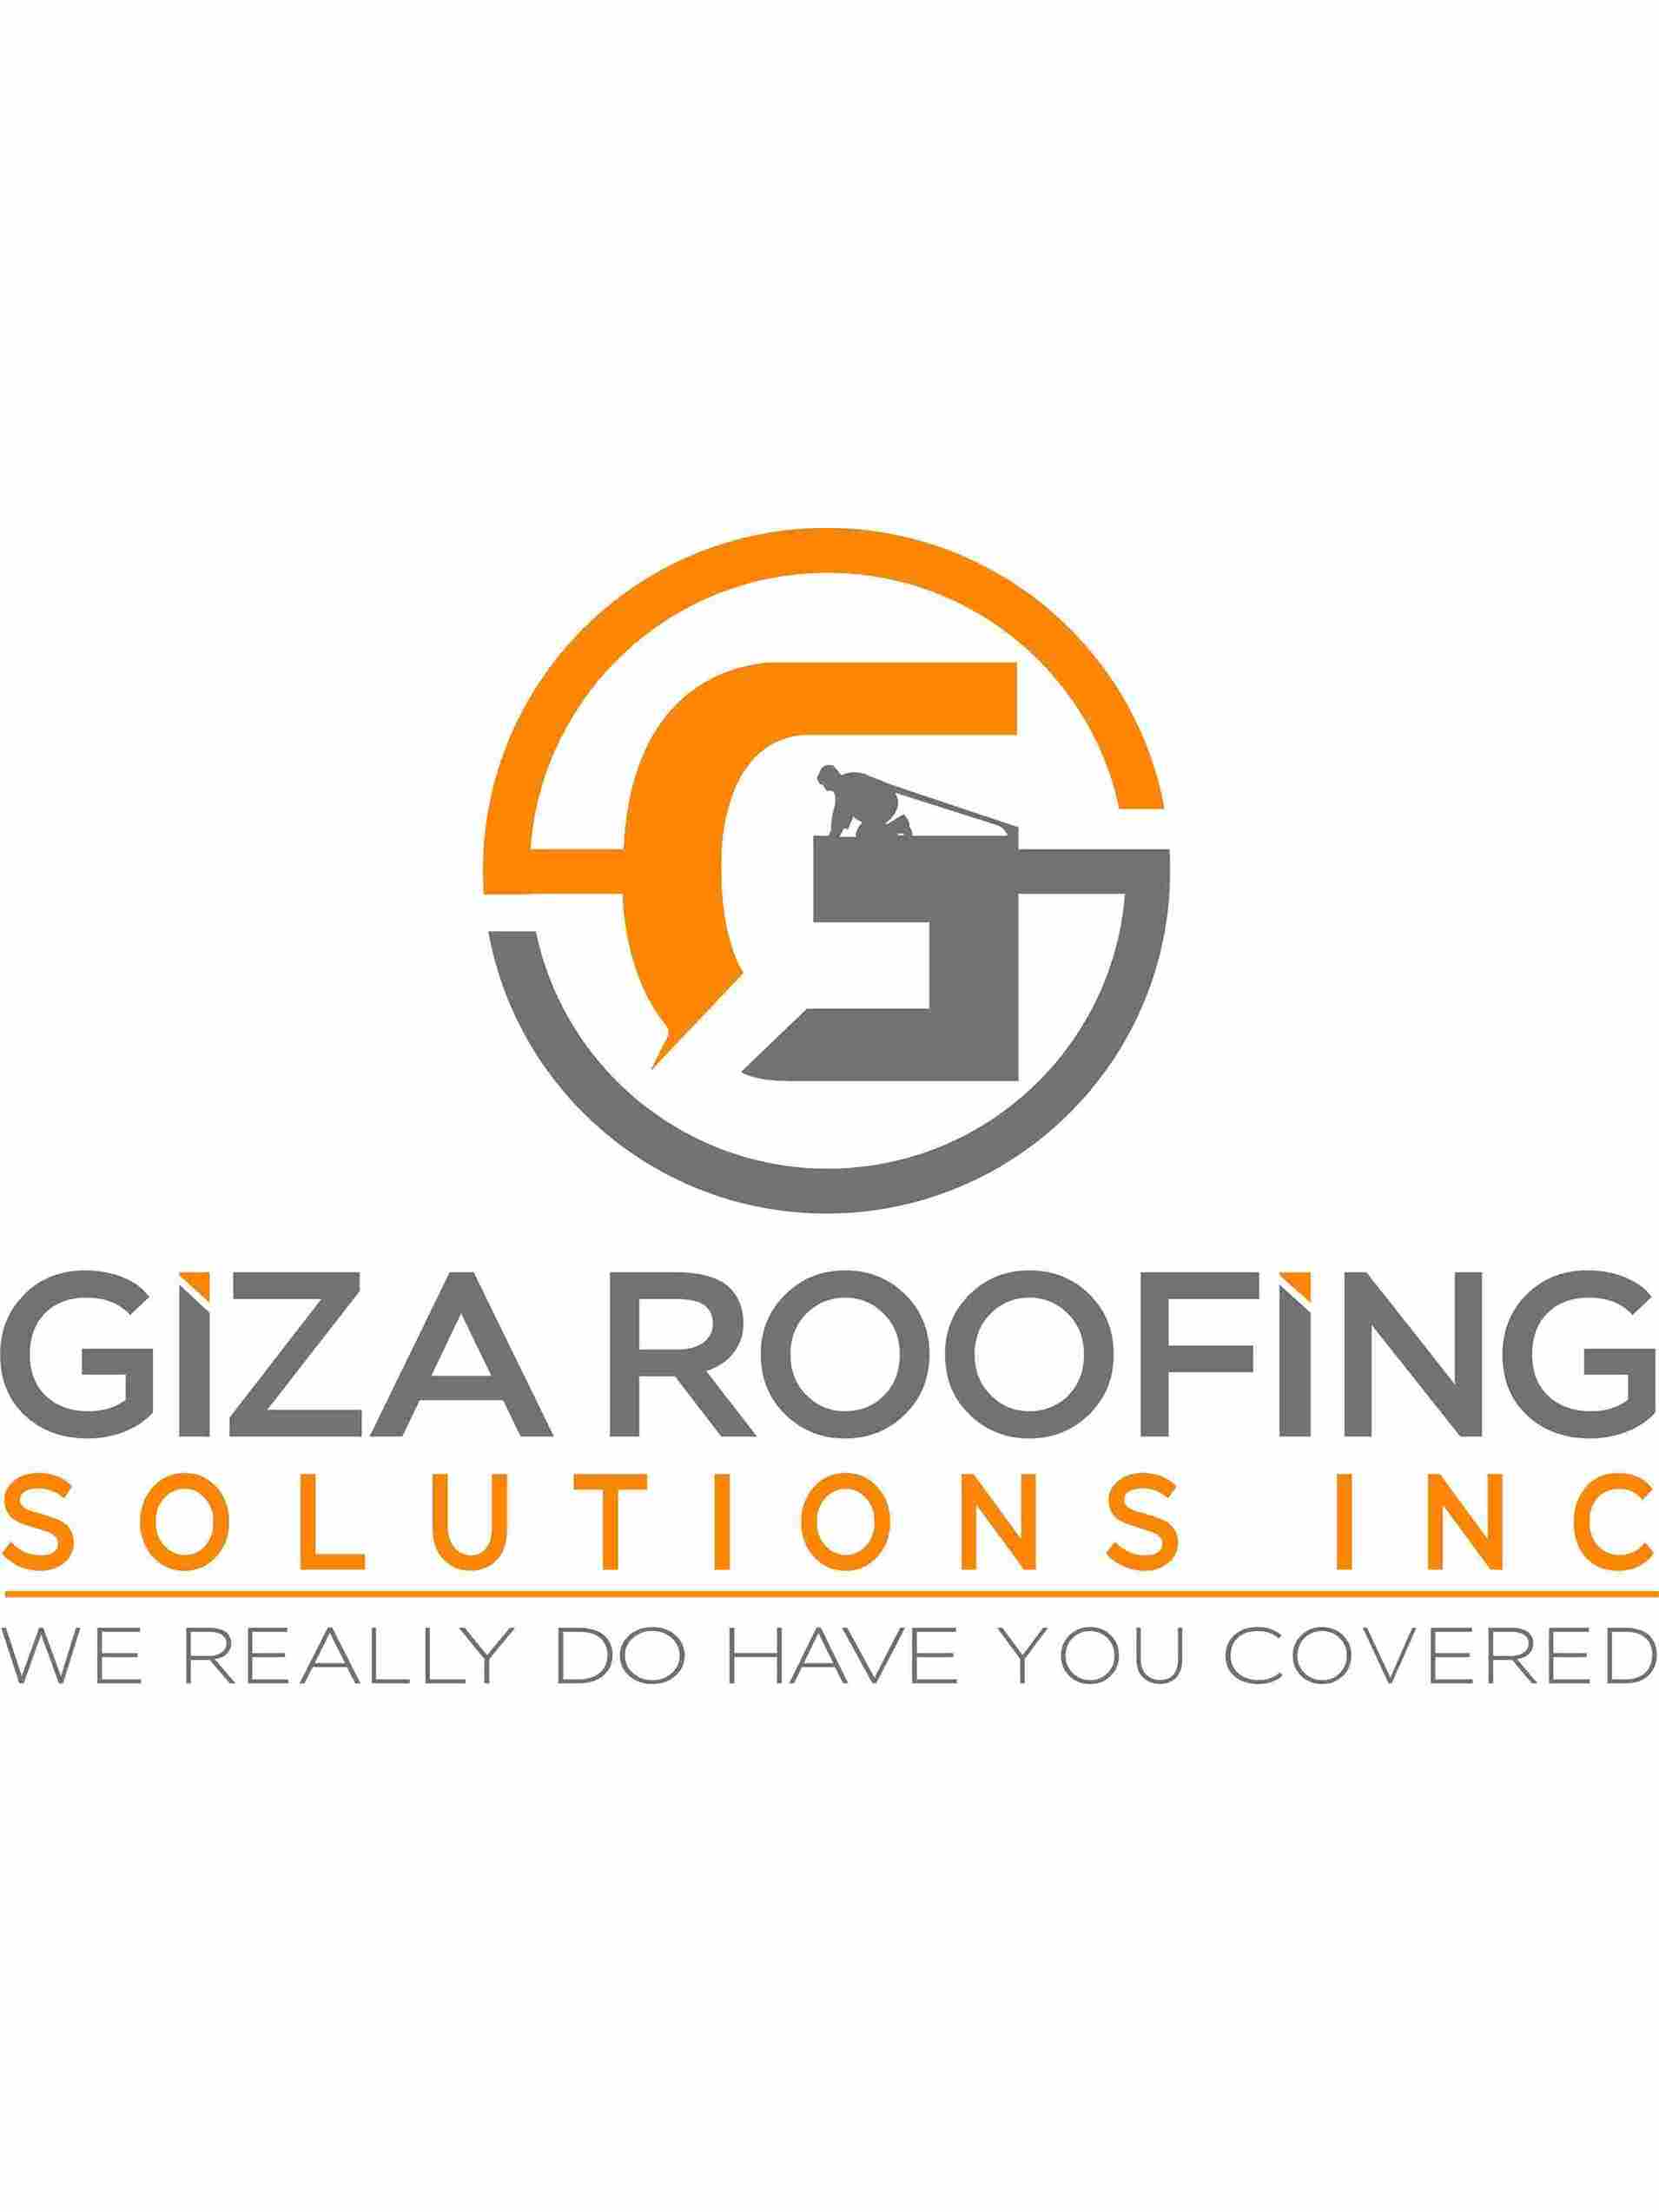 Giza Roofing